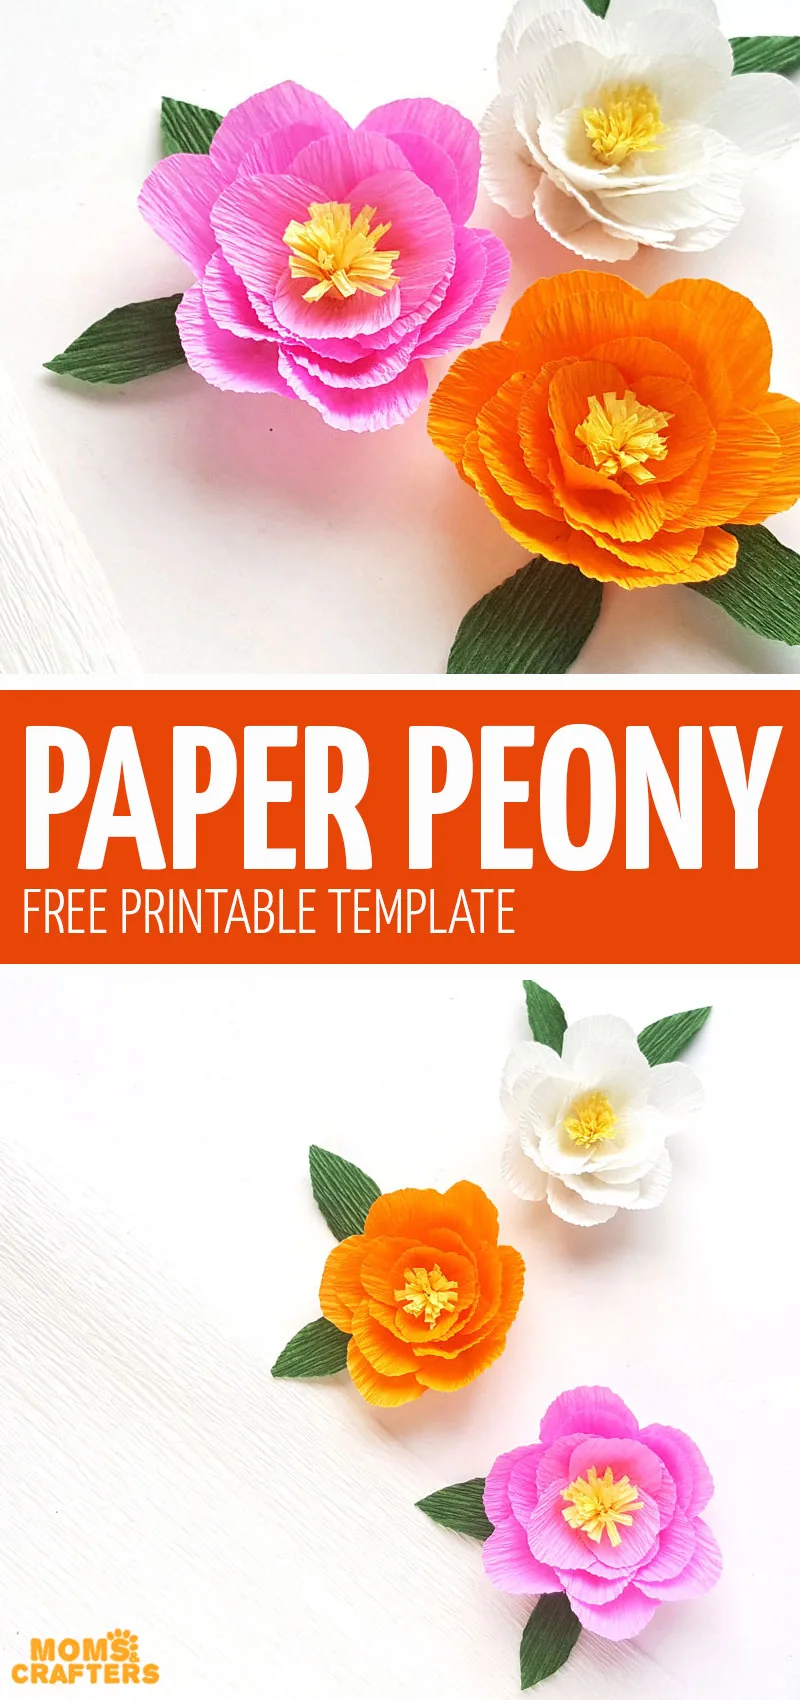 Click if you love making paper flowers and want to download this free printable crepe paper peony template! It's so much fun and one of my favorite paper flowers craft for beginners.